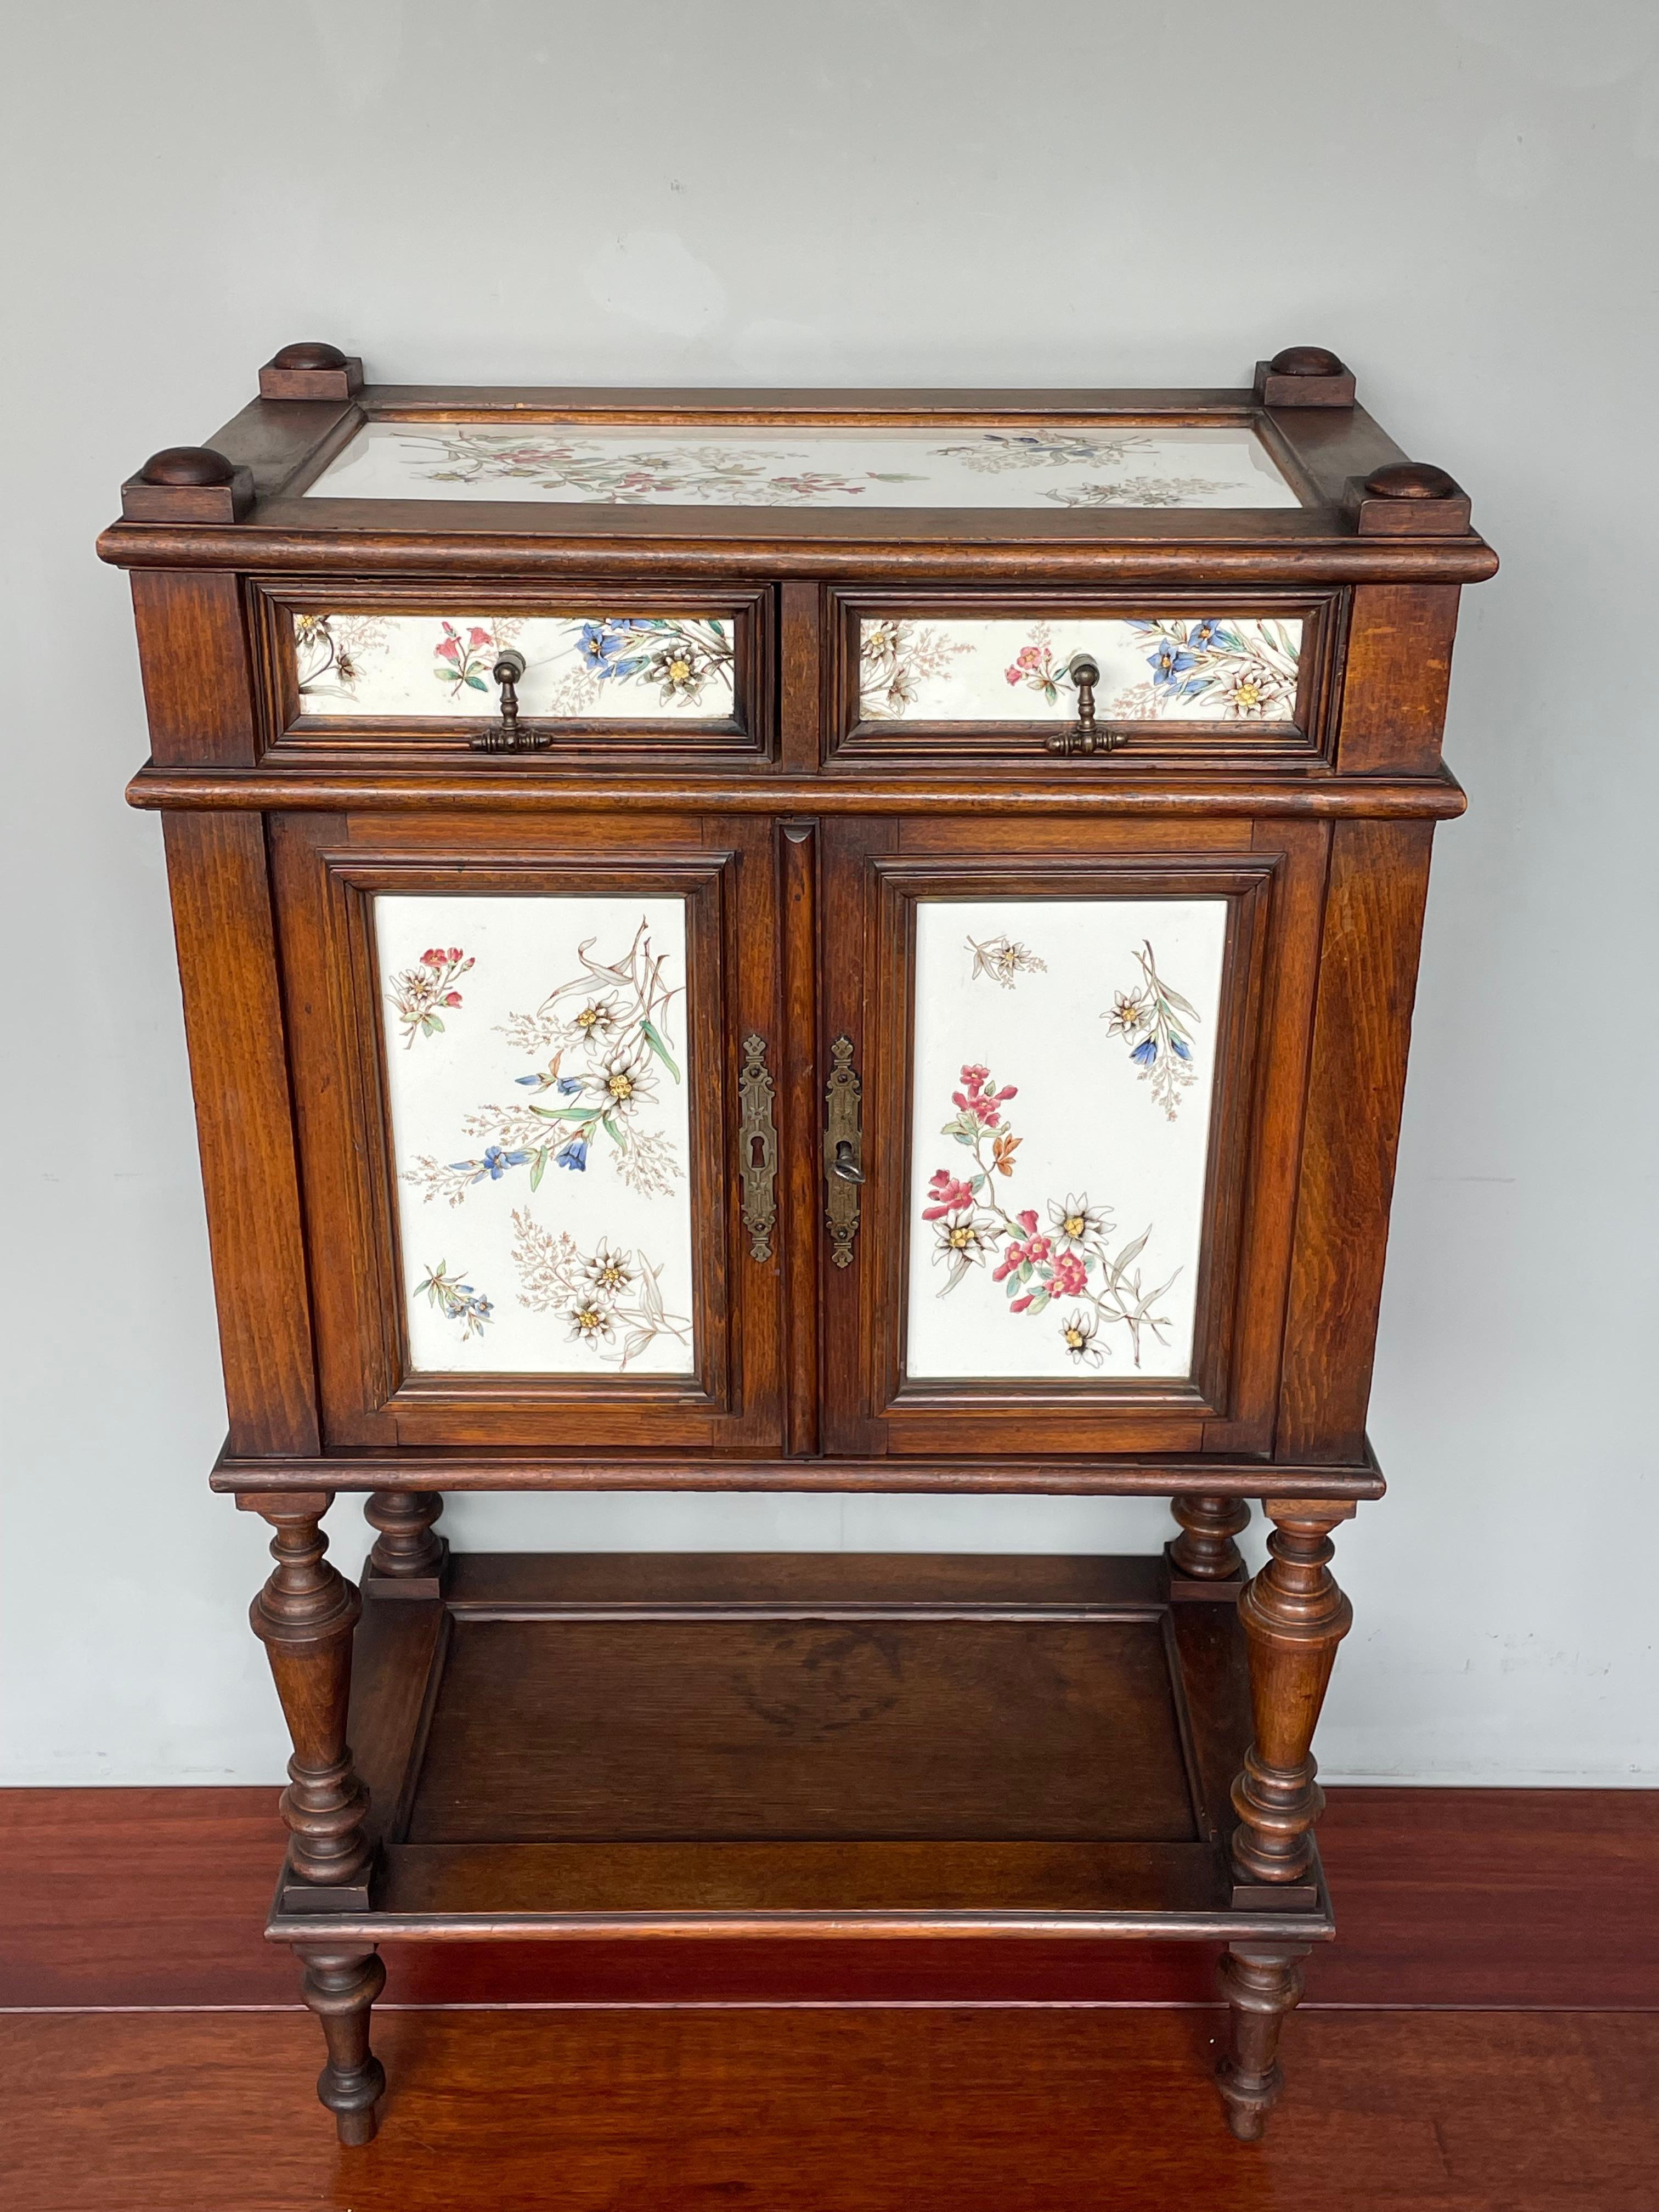 Very rare drinks cabinet with hand-painted & glazed porcelain tiles.

This very good condition and all-original antique cabinet is the only one of its kind that we have ever seen and it could very well be a one of a kind. What makes this work-of-art